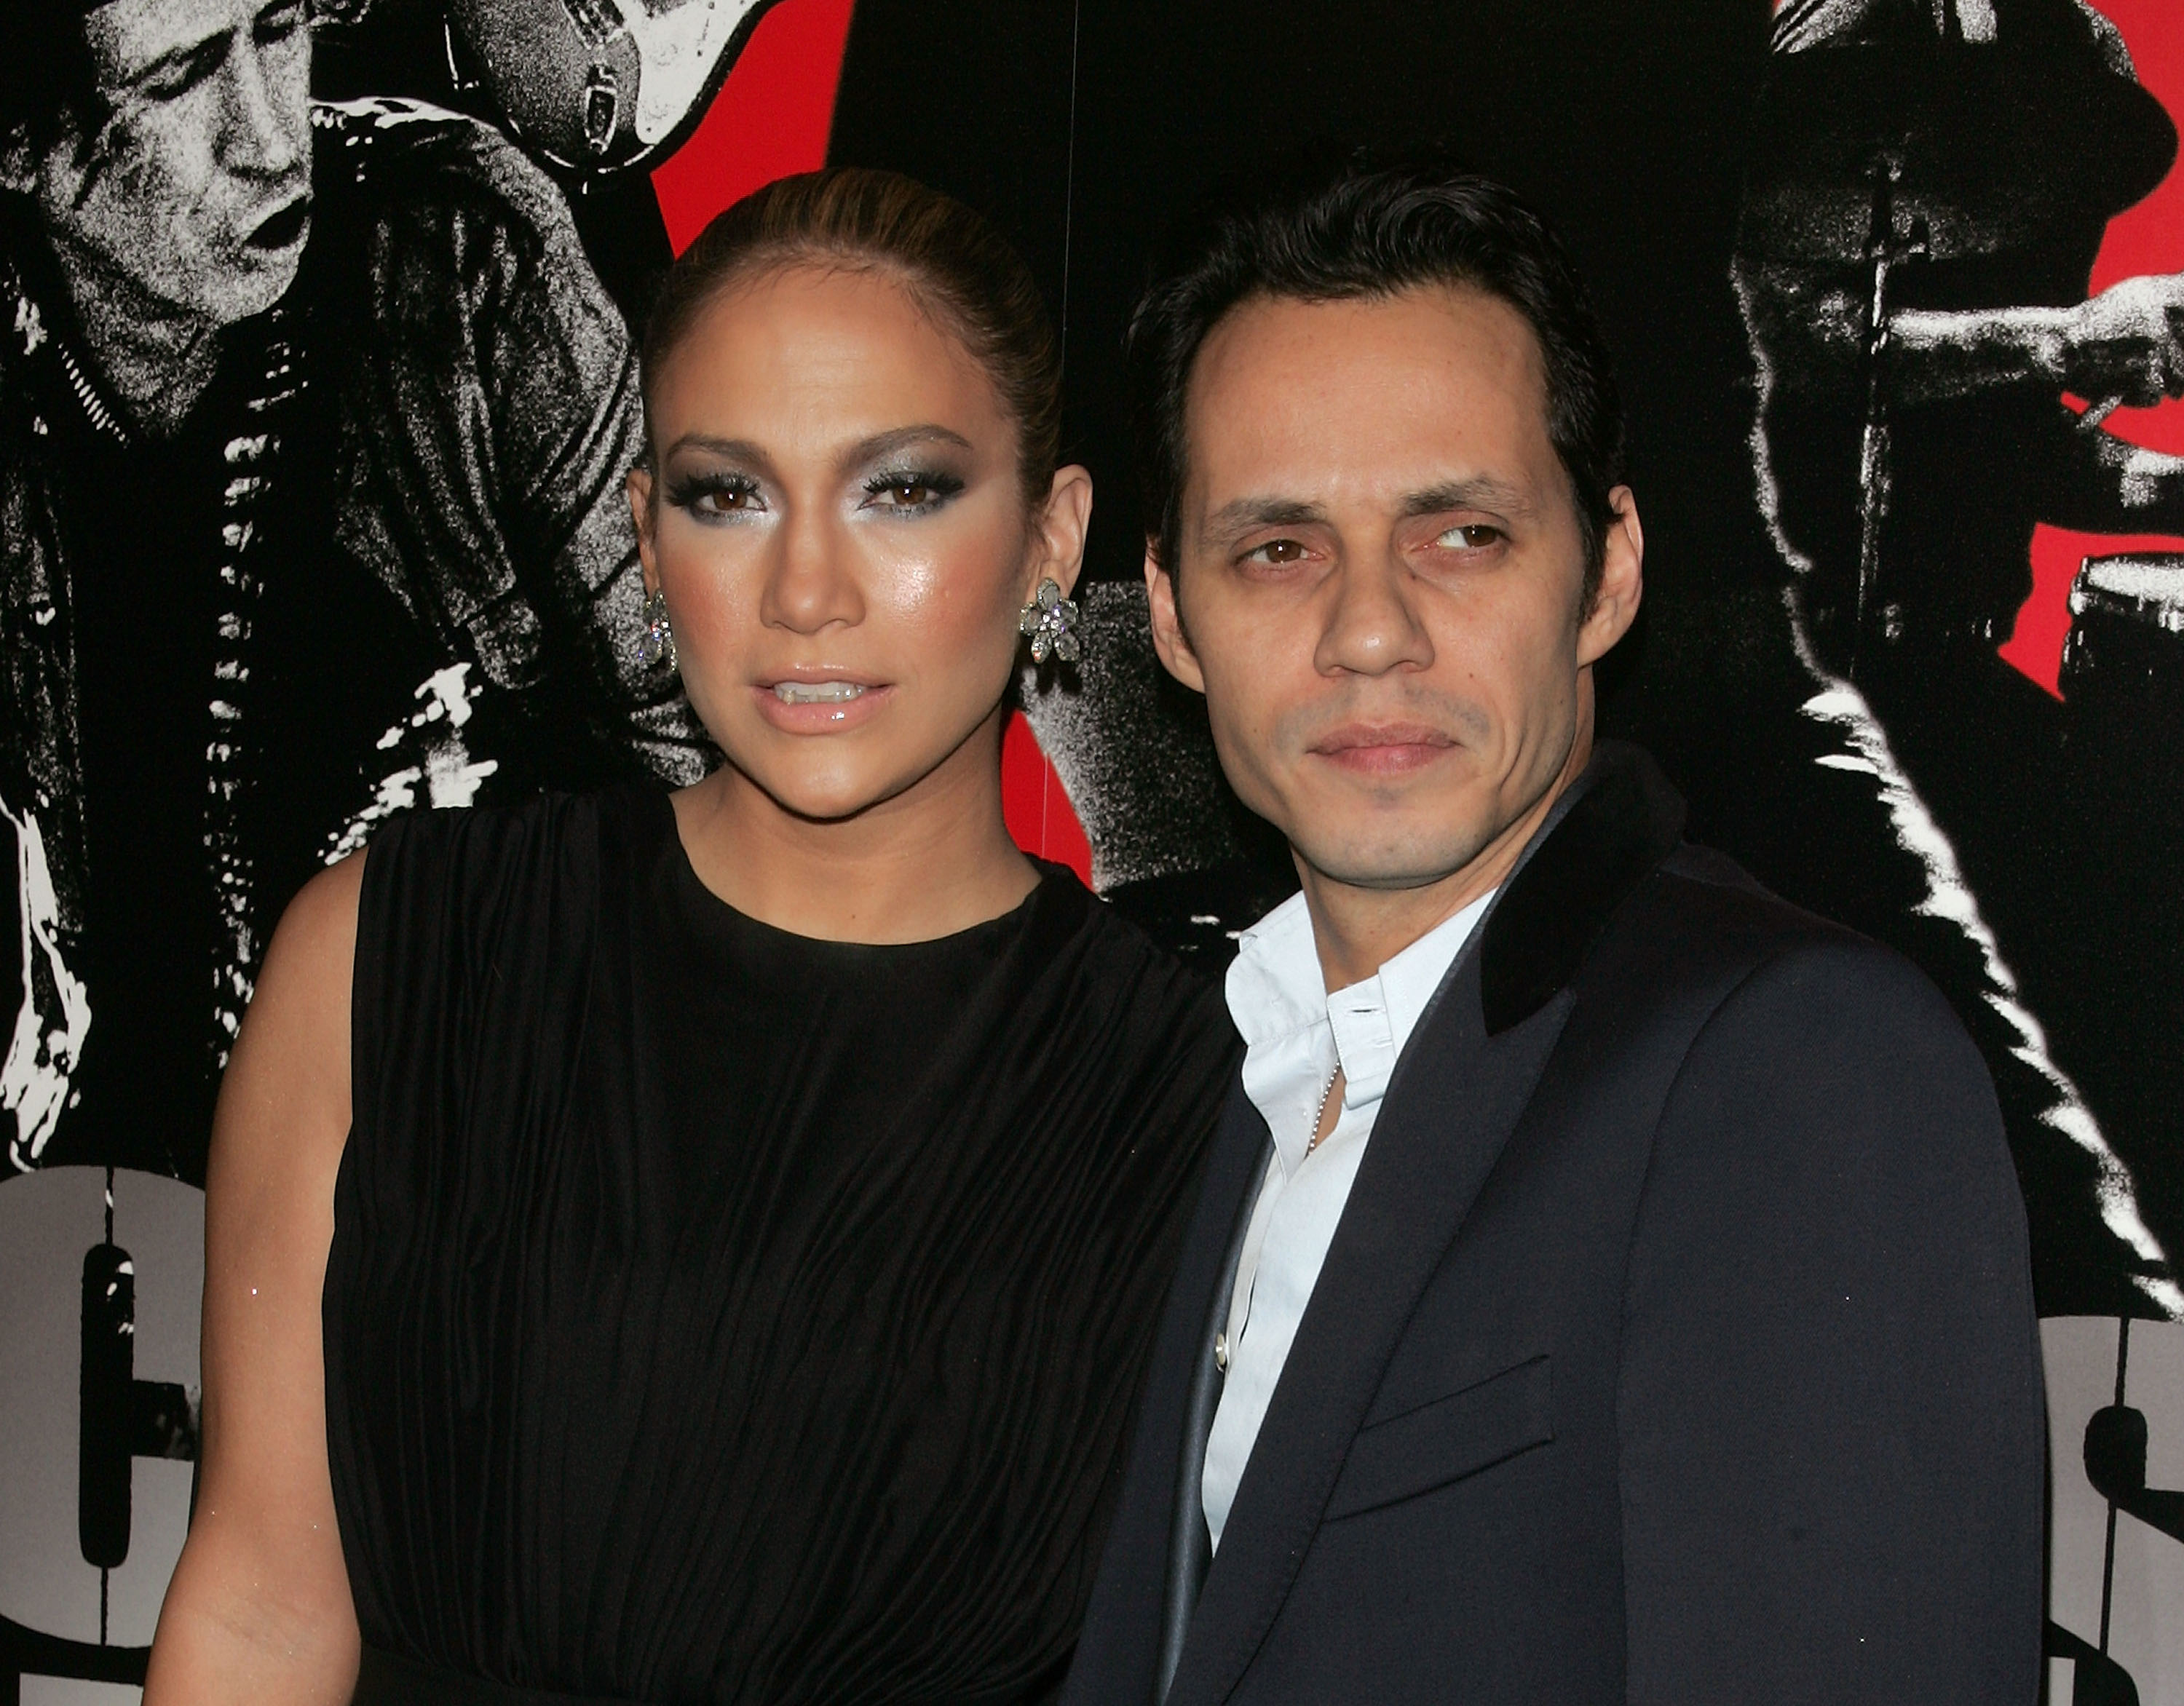 Lopez and Musician Marc Anthony in New York in 2008 | Source: Getty Images